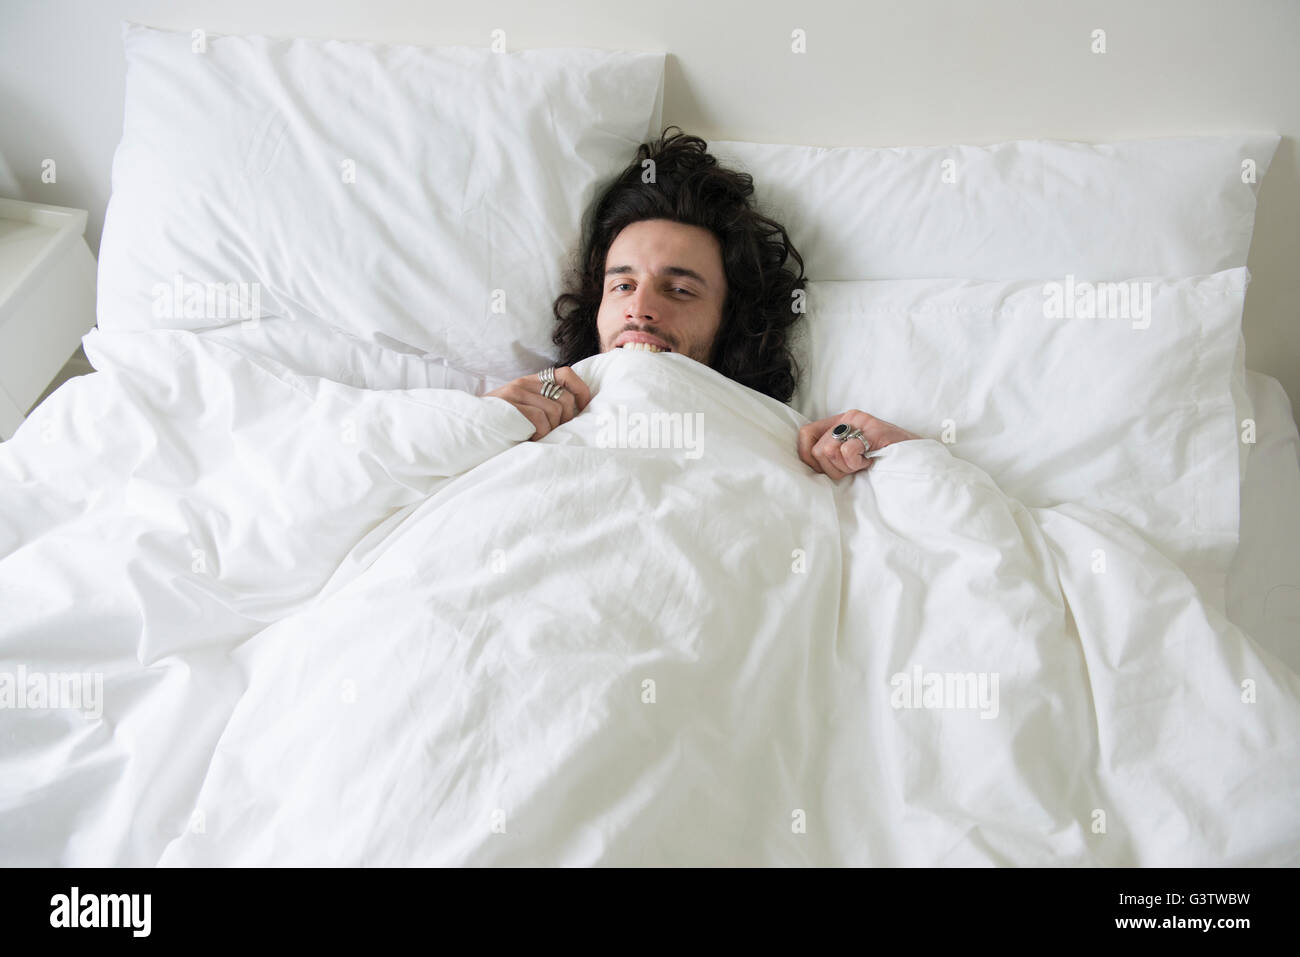 A cool young man lying in a bed playing peekaboo with the covers to the camera. Stock Photo